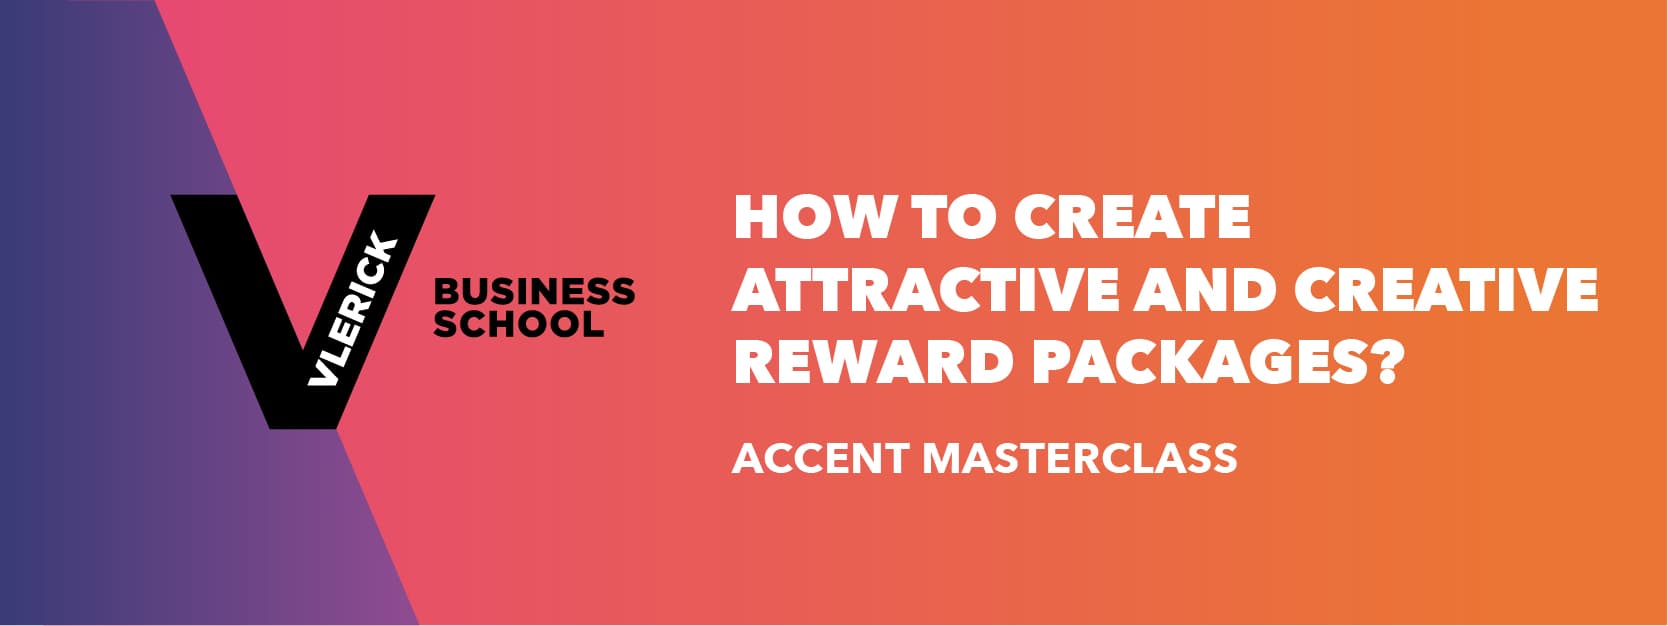 Accent Masterclass - How to create attractive and creative reward packages?